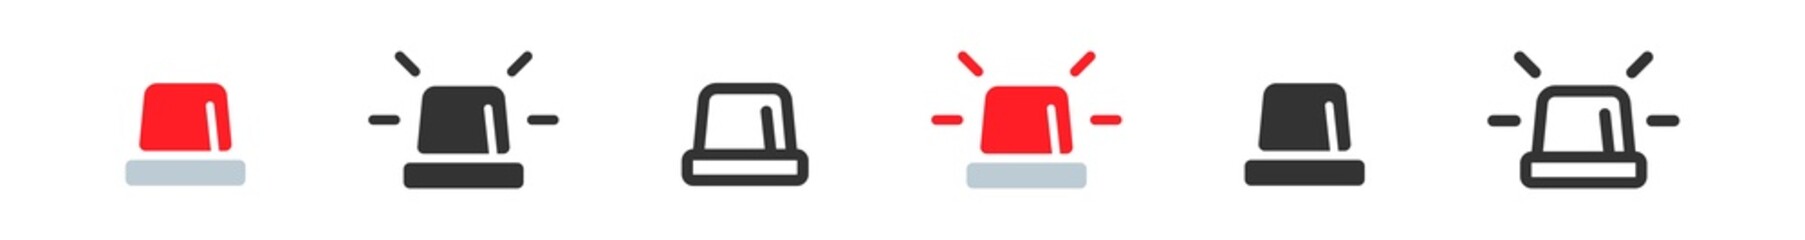 Siren icon. Emergency light symbol. Alarm and alert signal sign in vector flat style.